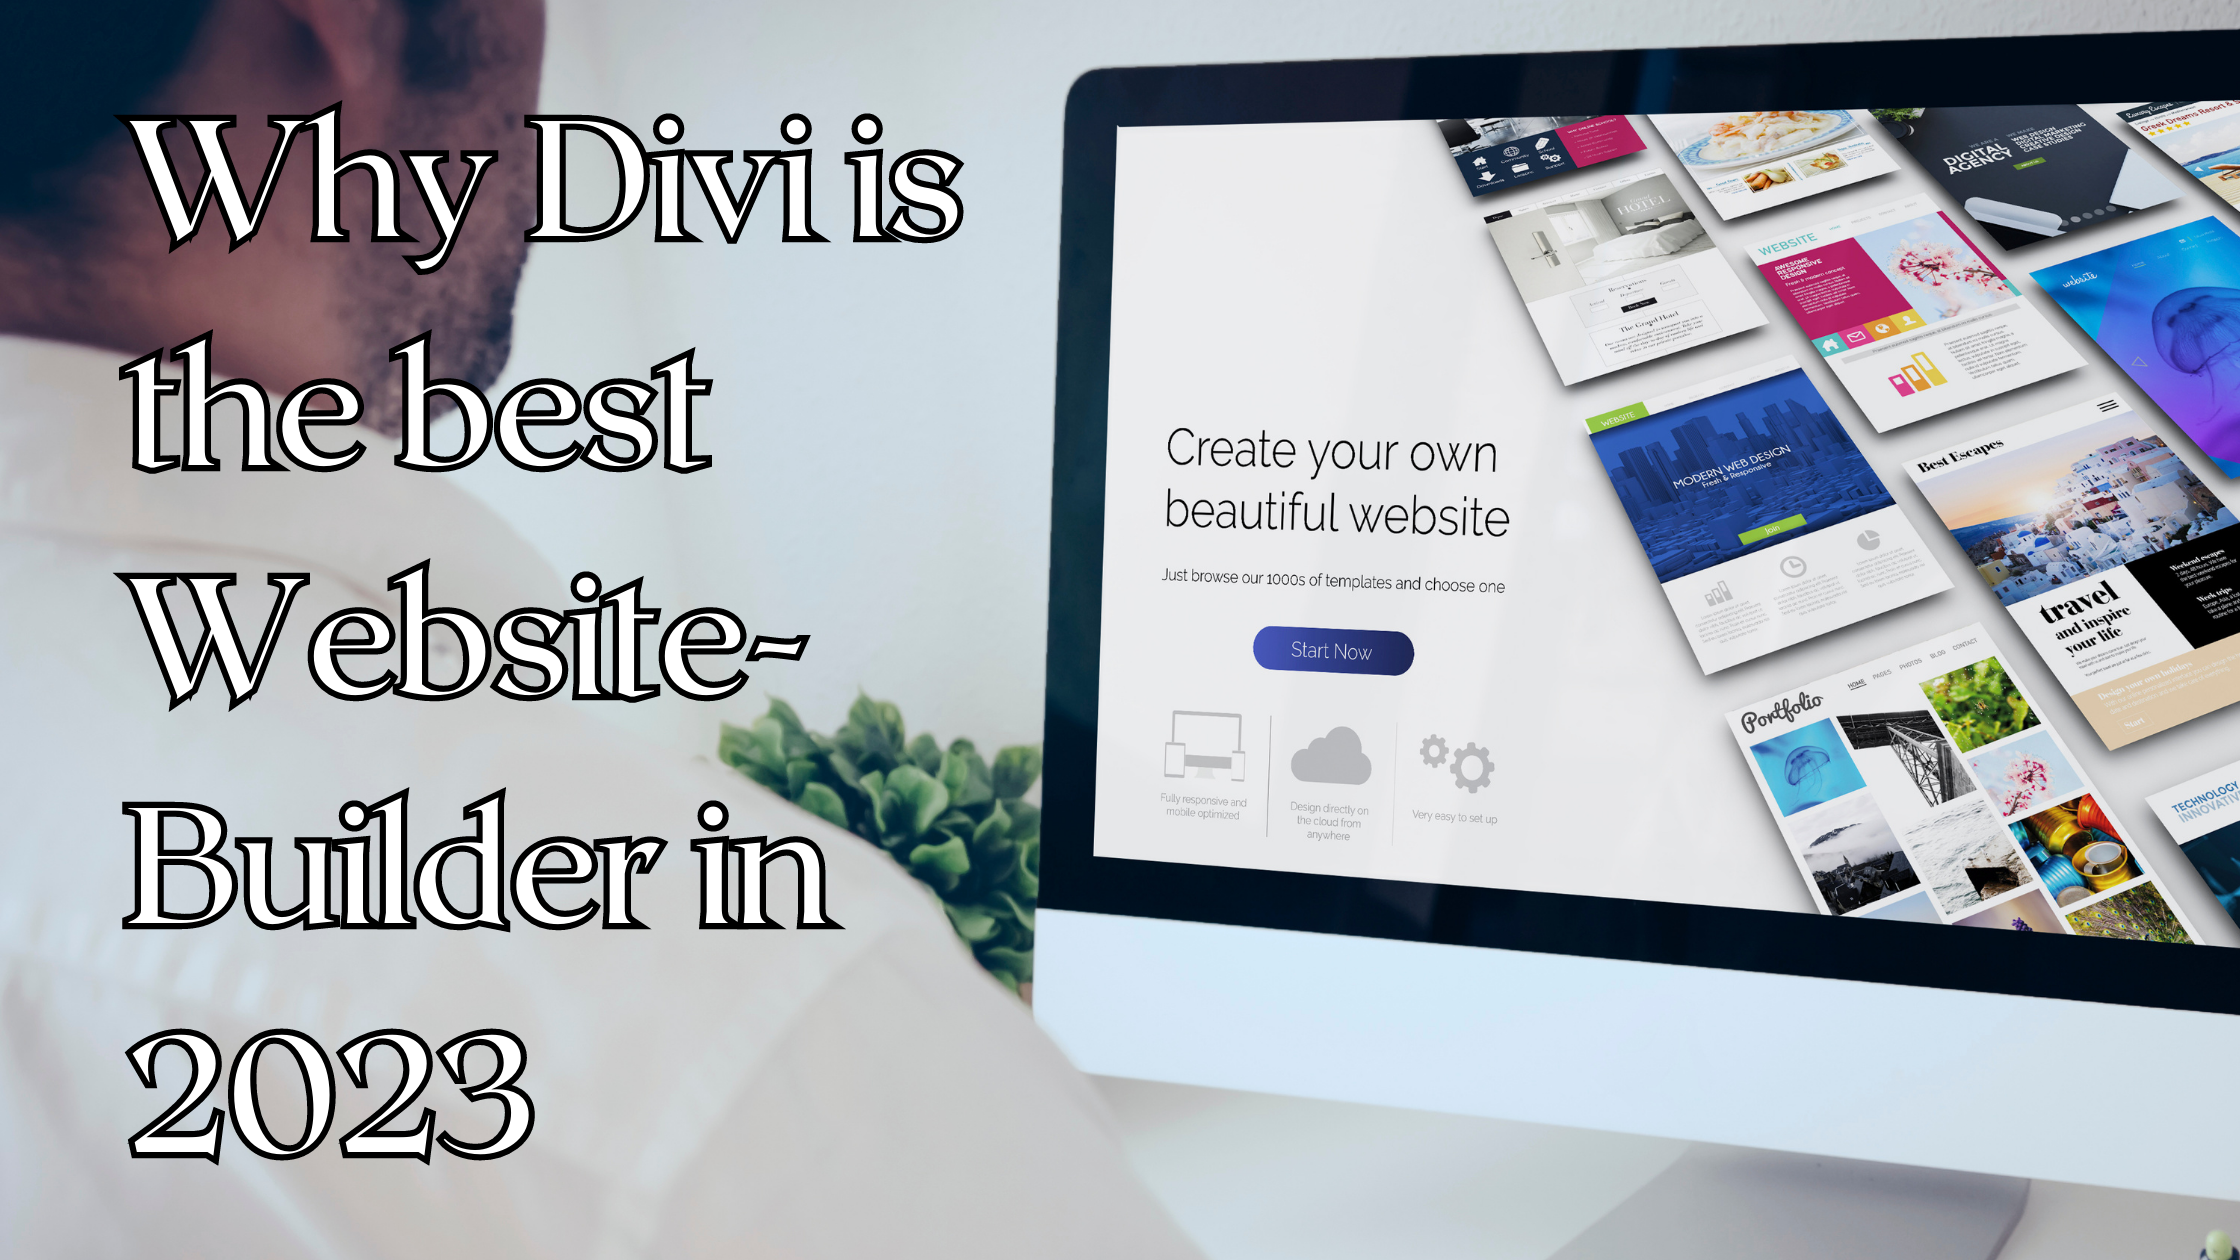 Why we think Divi is the best website builder in 2023